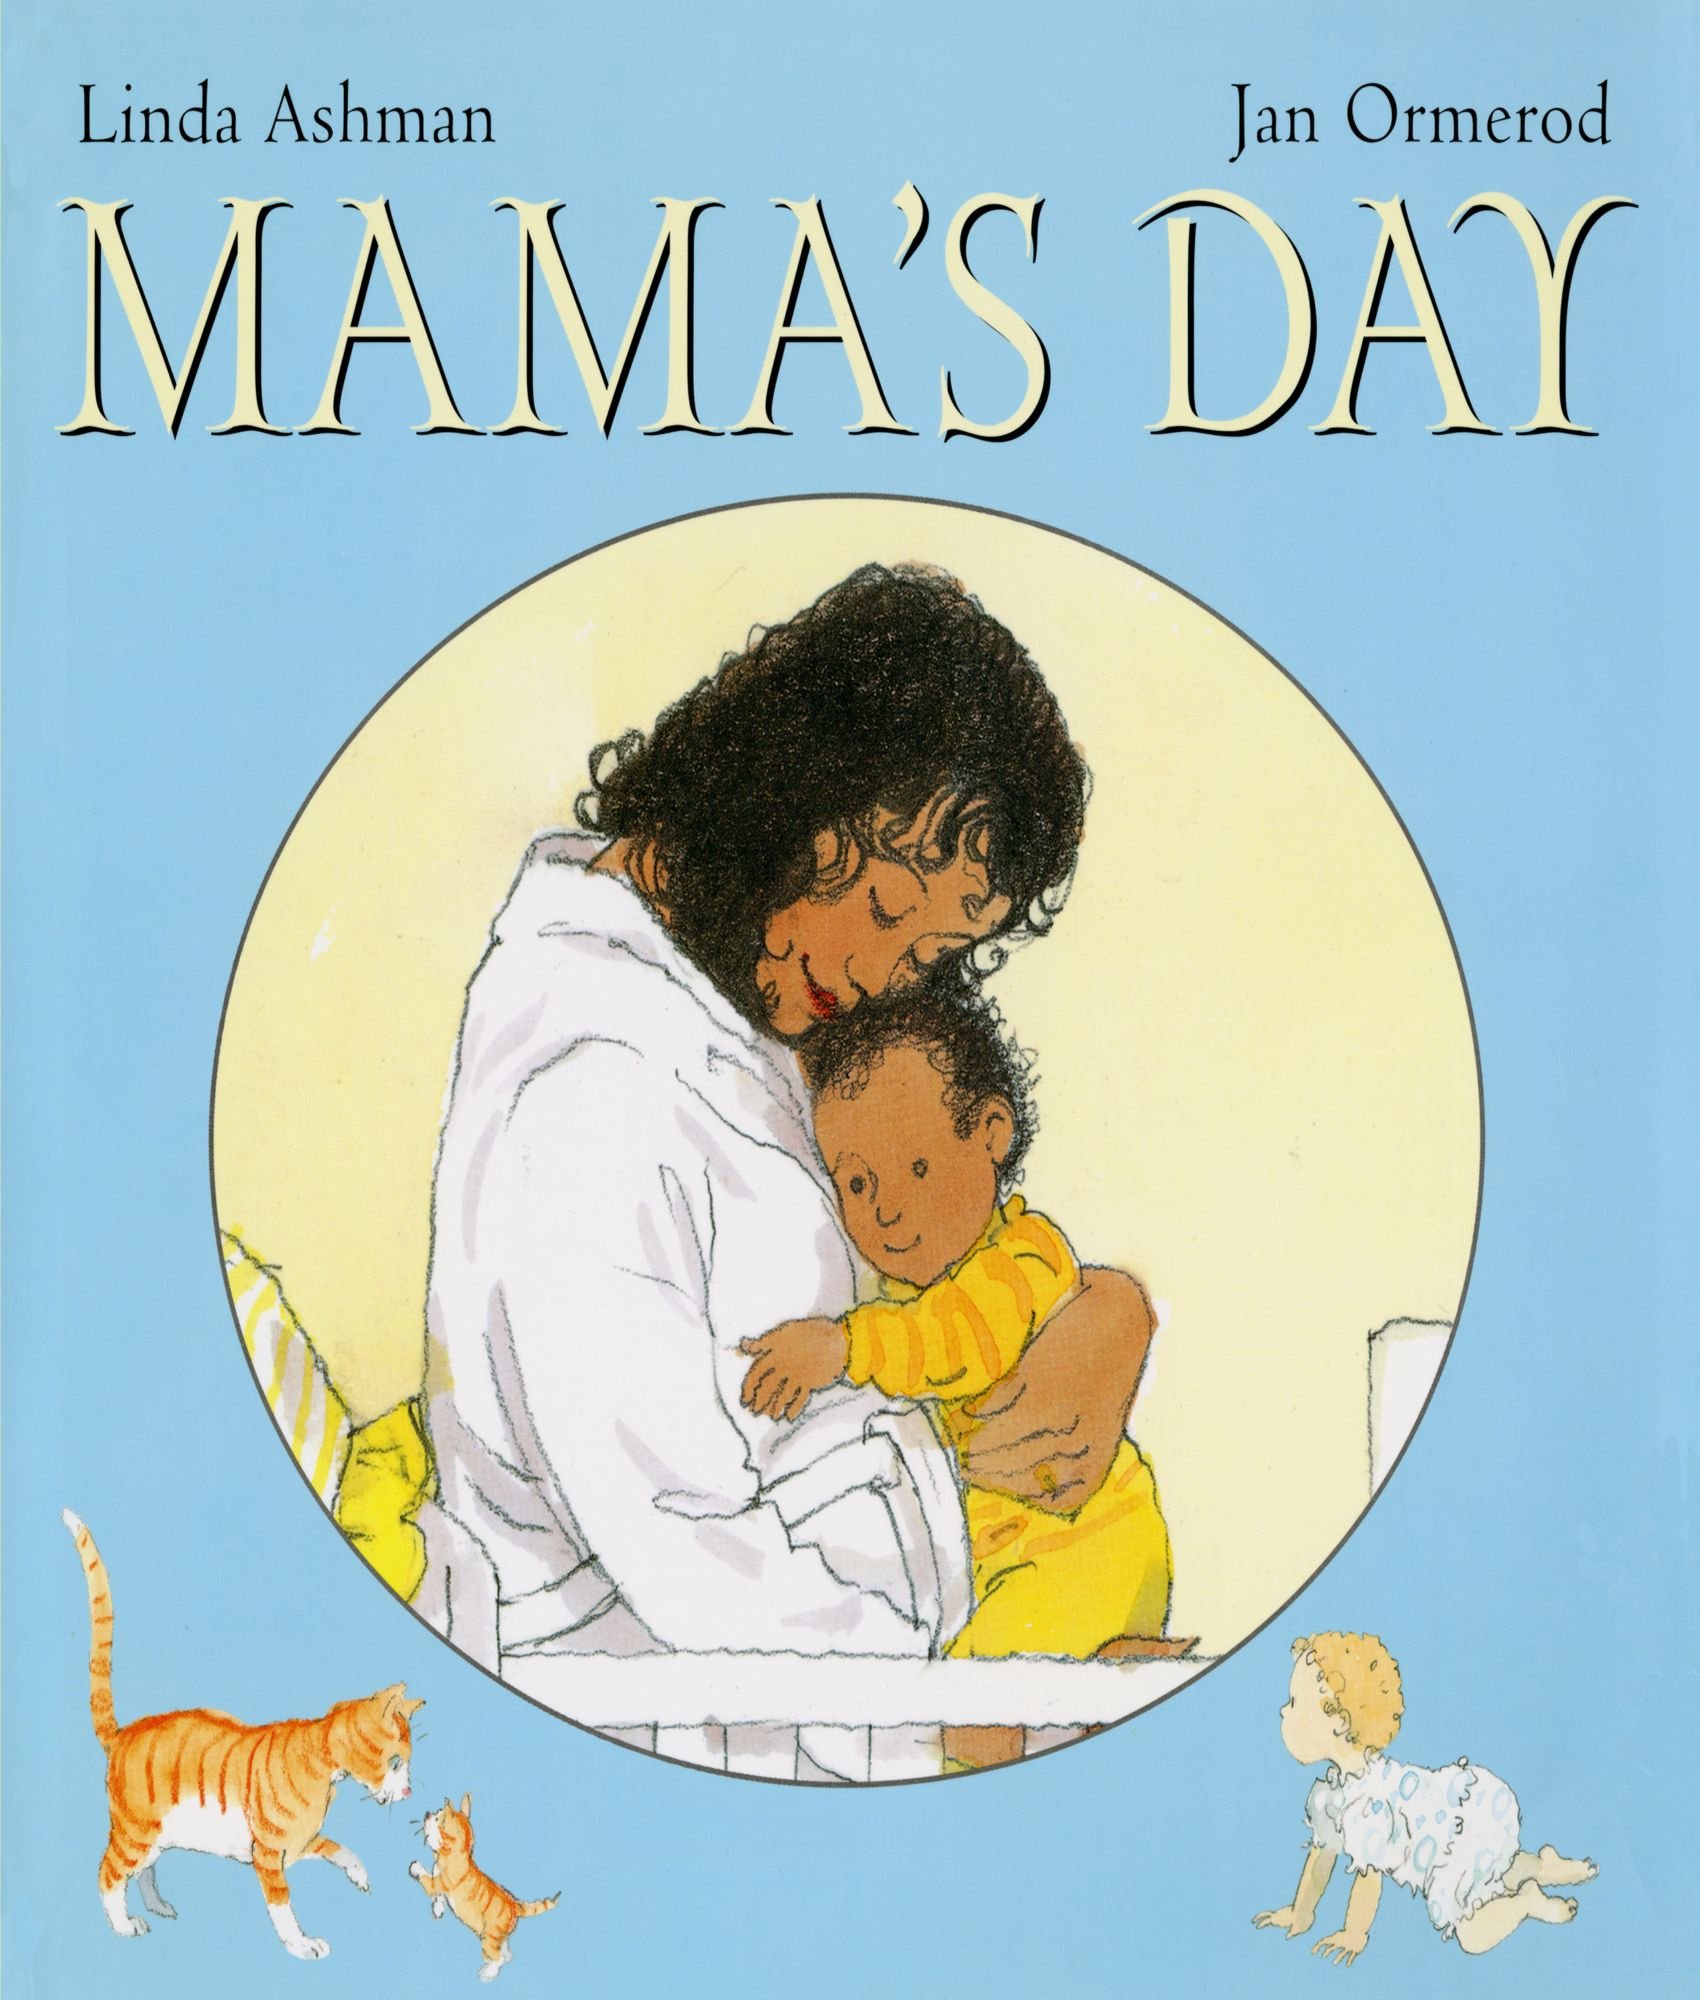 Cover art for Mama's Day by Linda Ashman and Jan Ormerod